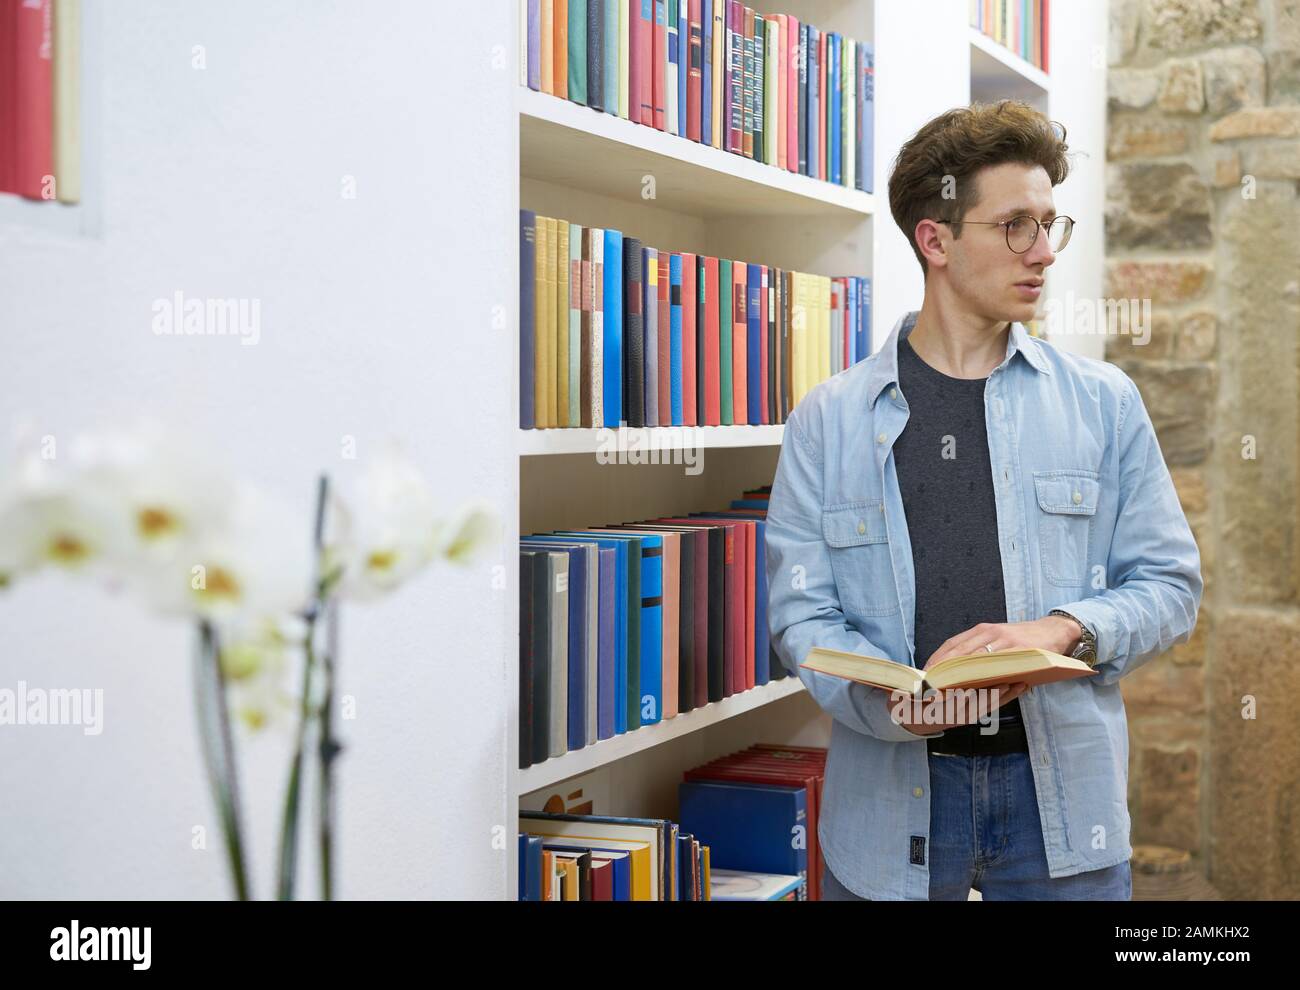 Young student with glasses in library looking to his left side and holding a book in his hands. Stock Photo